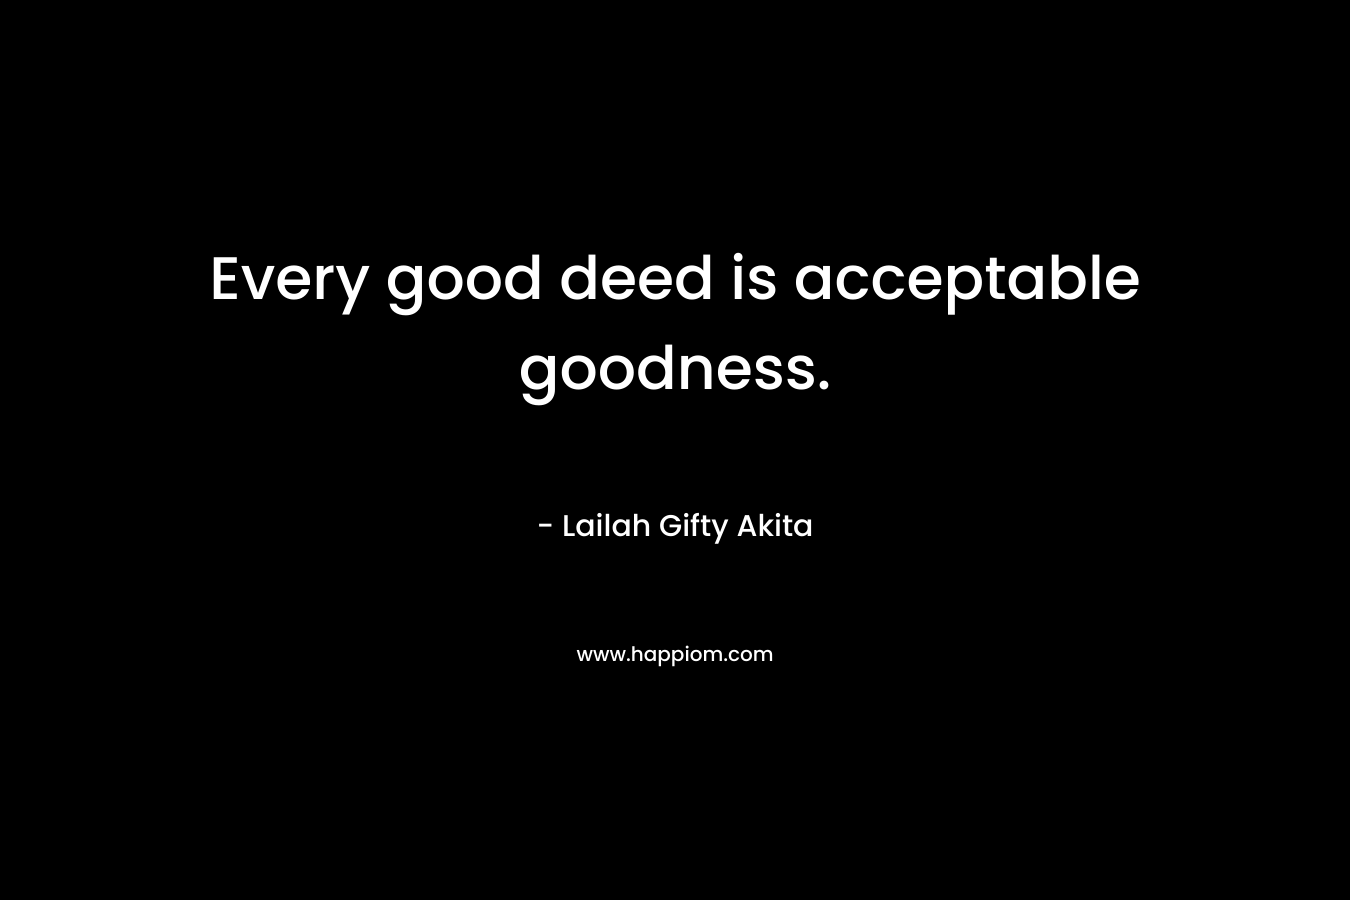 Every good deed is acceptable goodness.